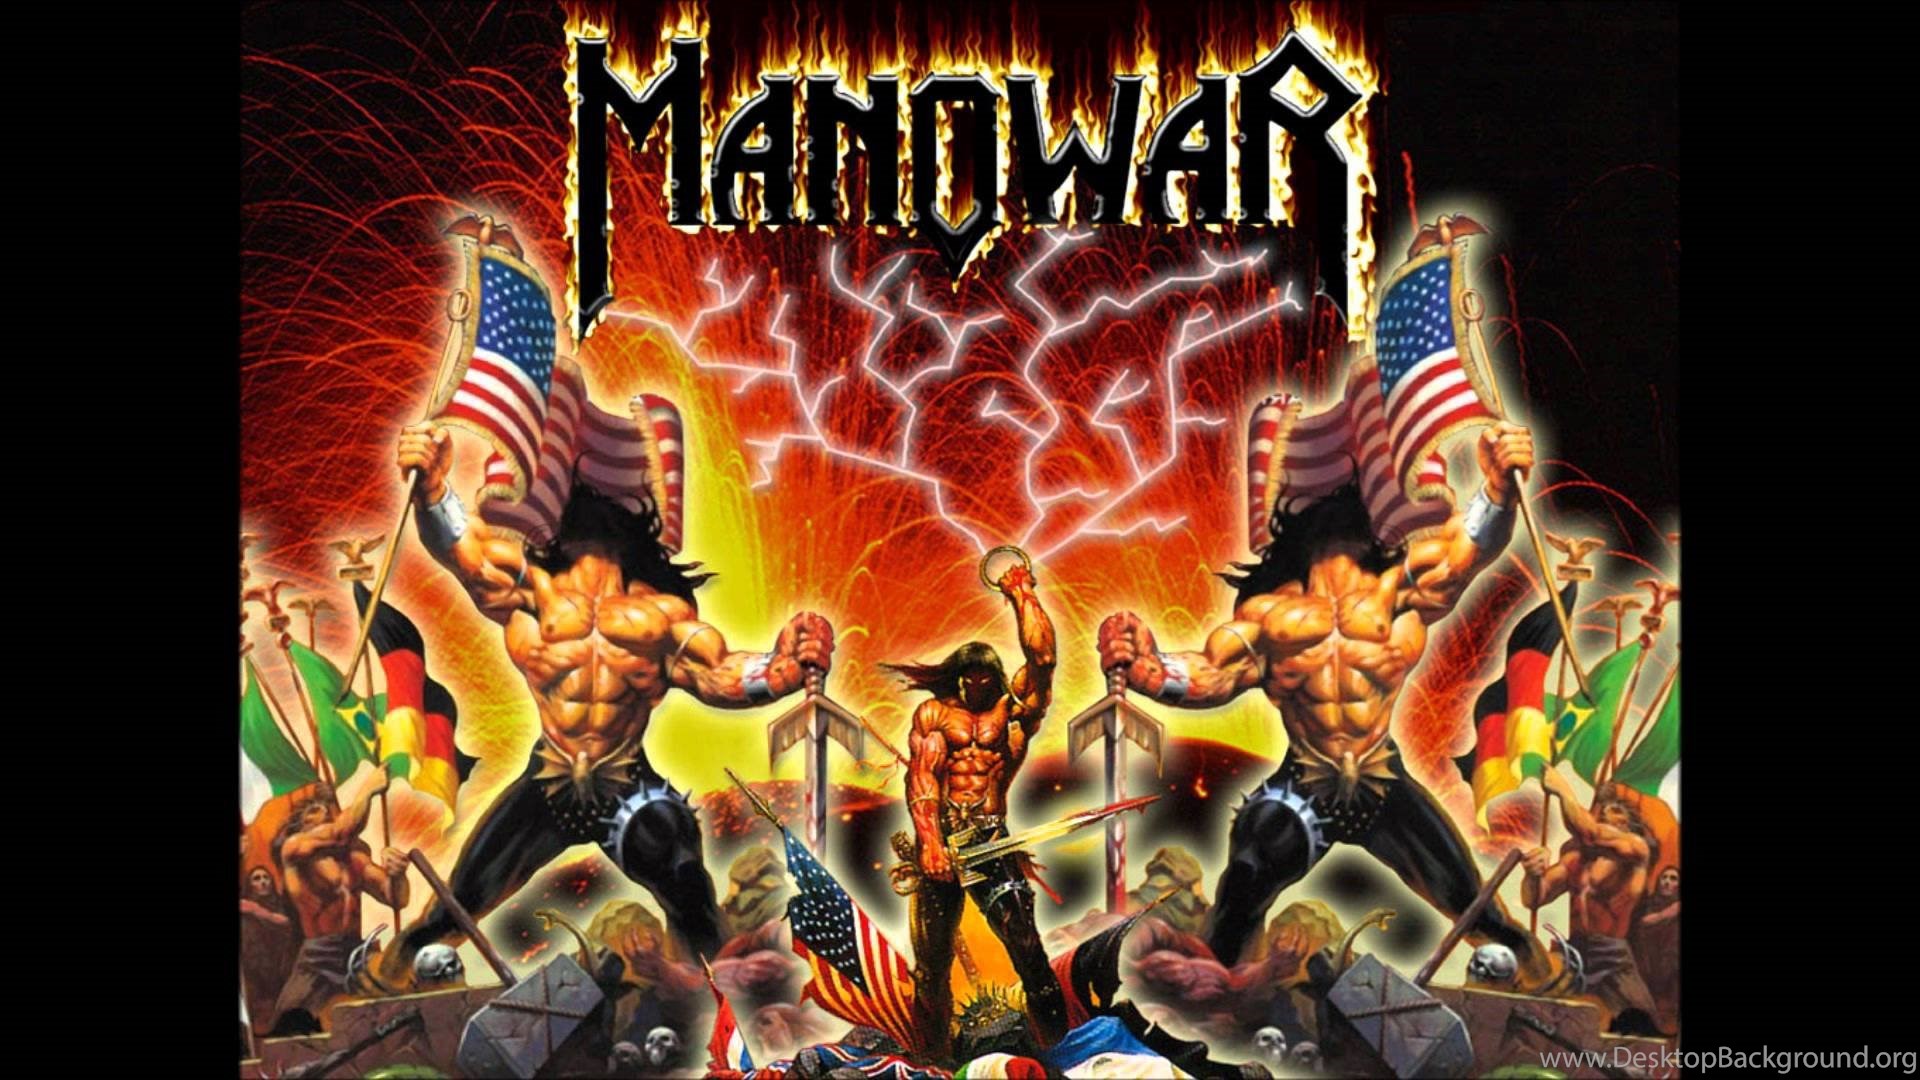 manowar warriors of the world mp3 free download